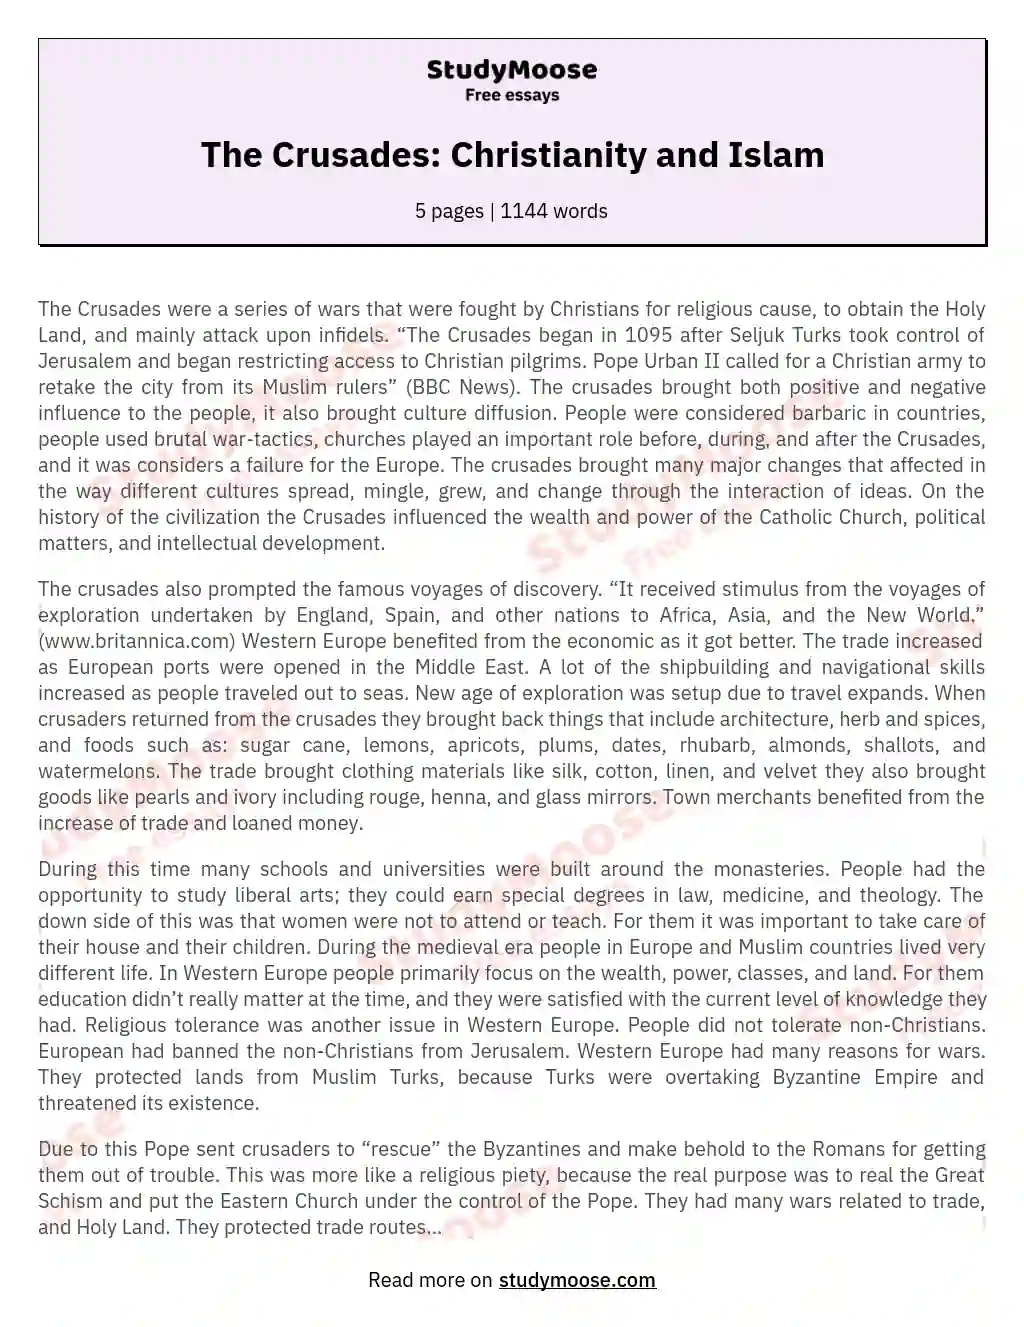 The Crusades: Christianity and Islam essay